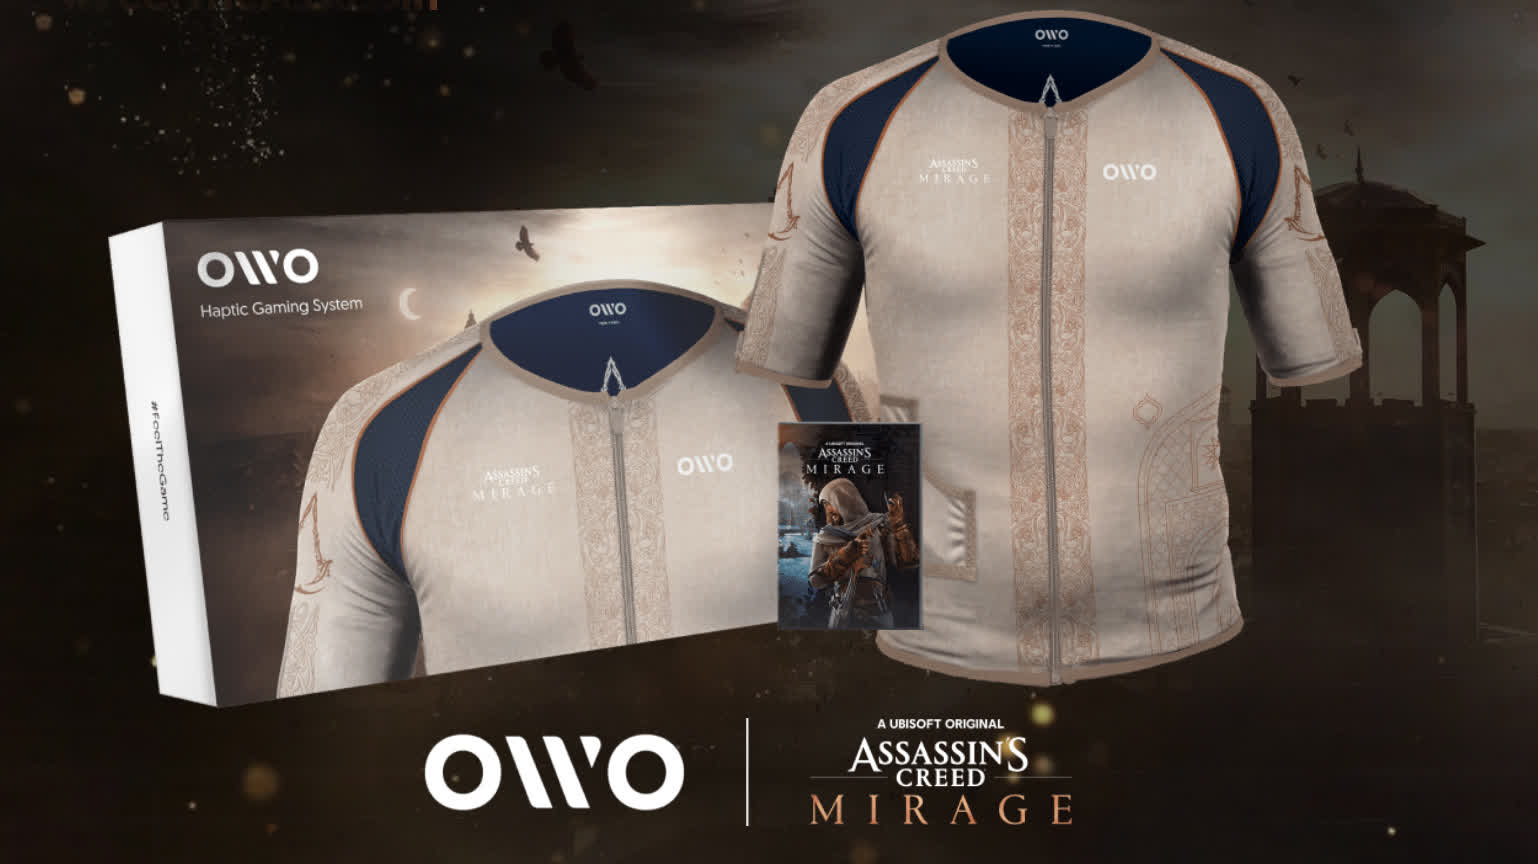 Assassin's Creed haptic feedback shirt will let players feel every punch, stab, and fall